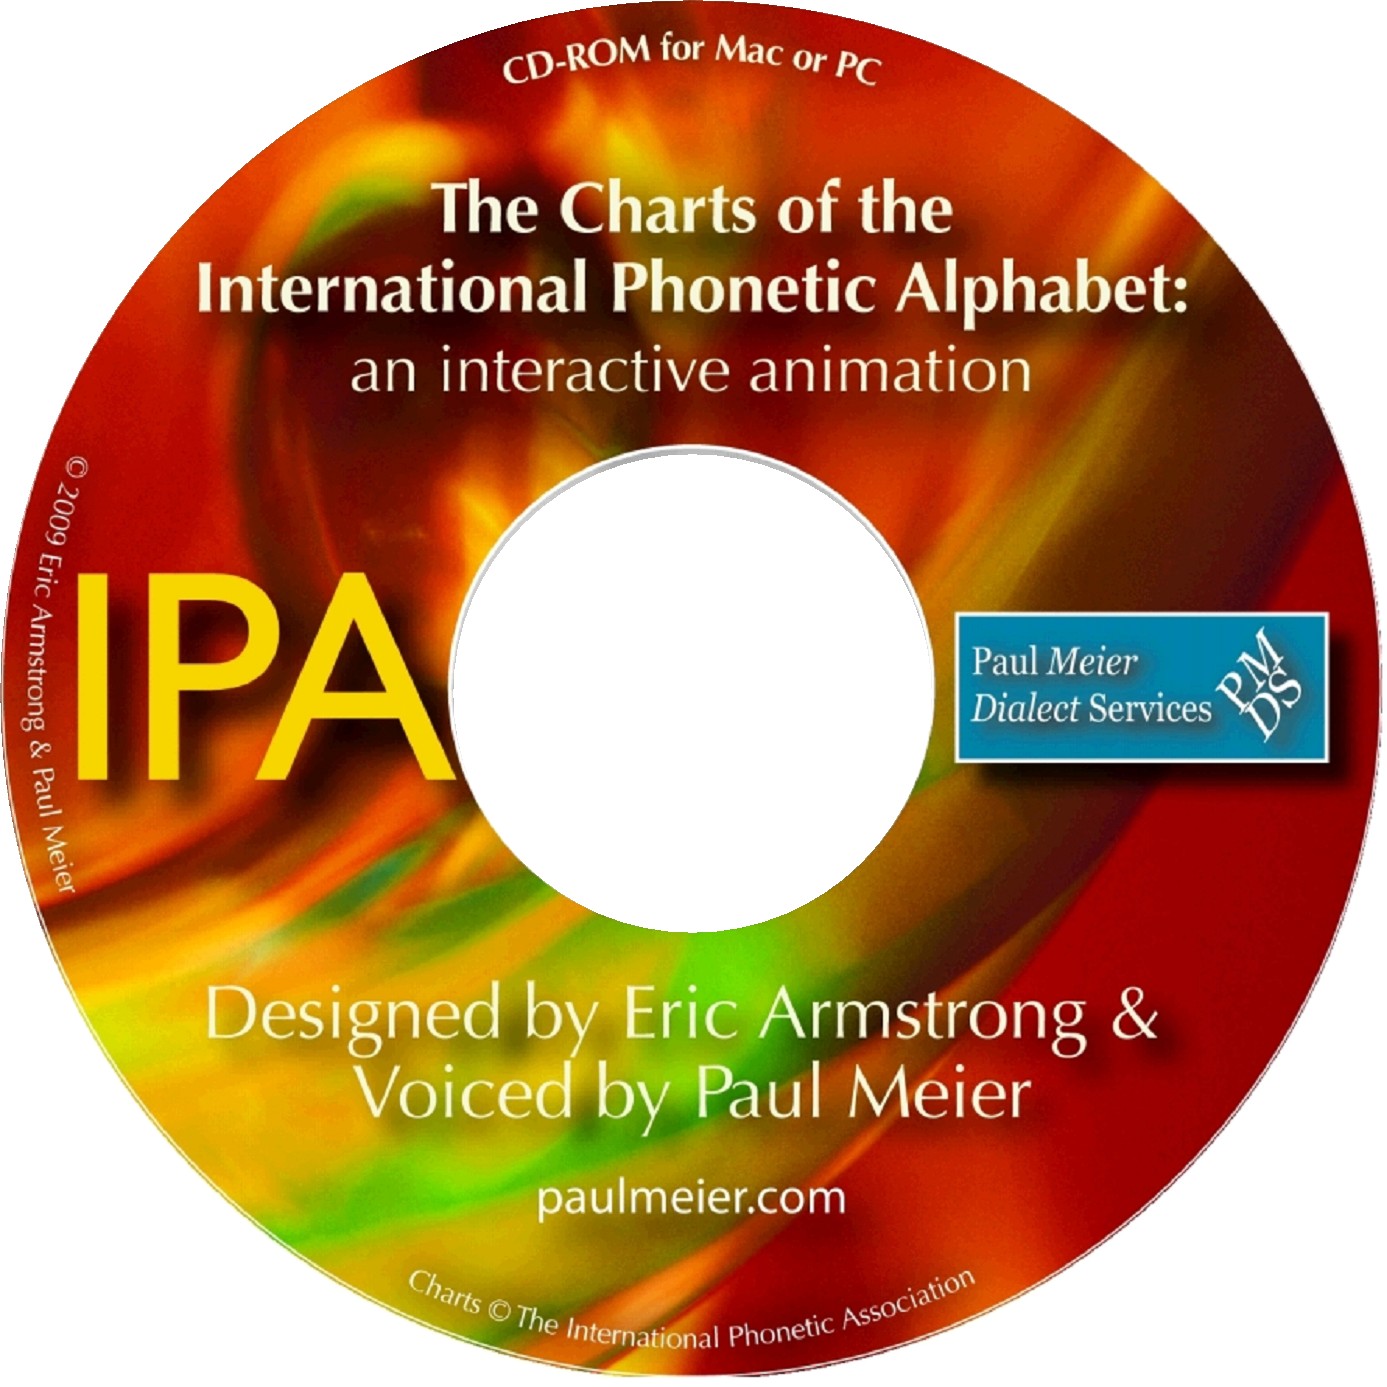 Interactive CD-ROM for the International Phonetic Alphabet | Paul Meier  Dialect Services